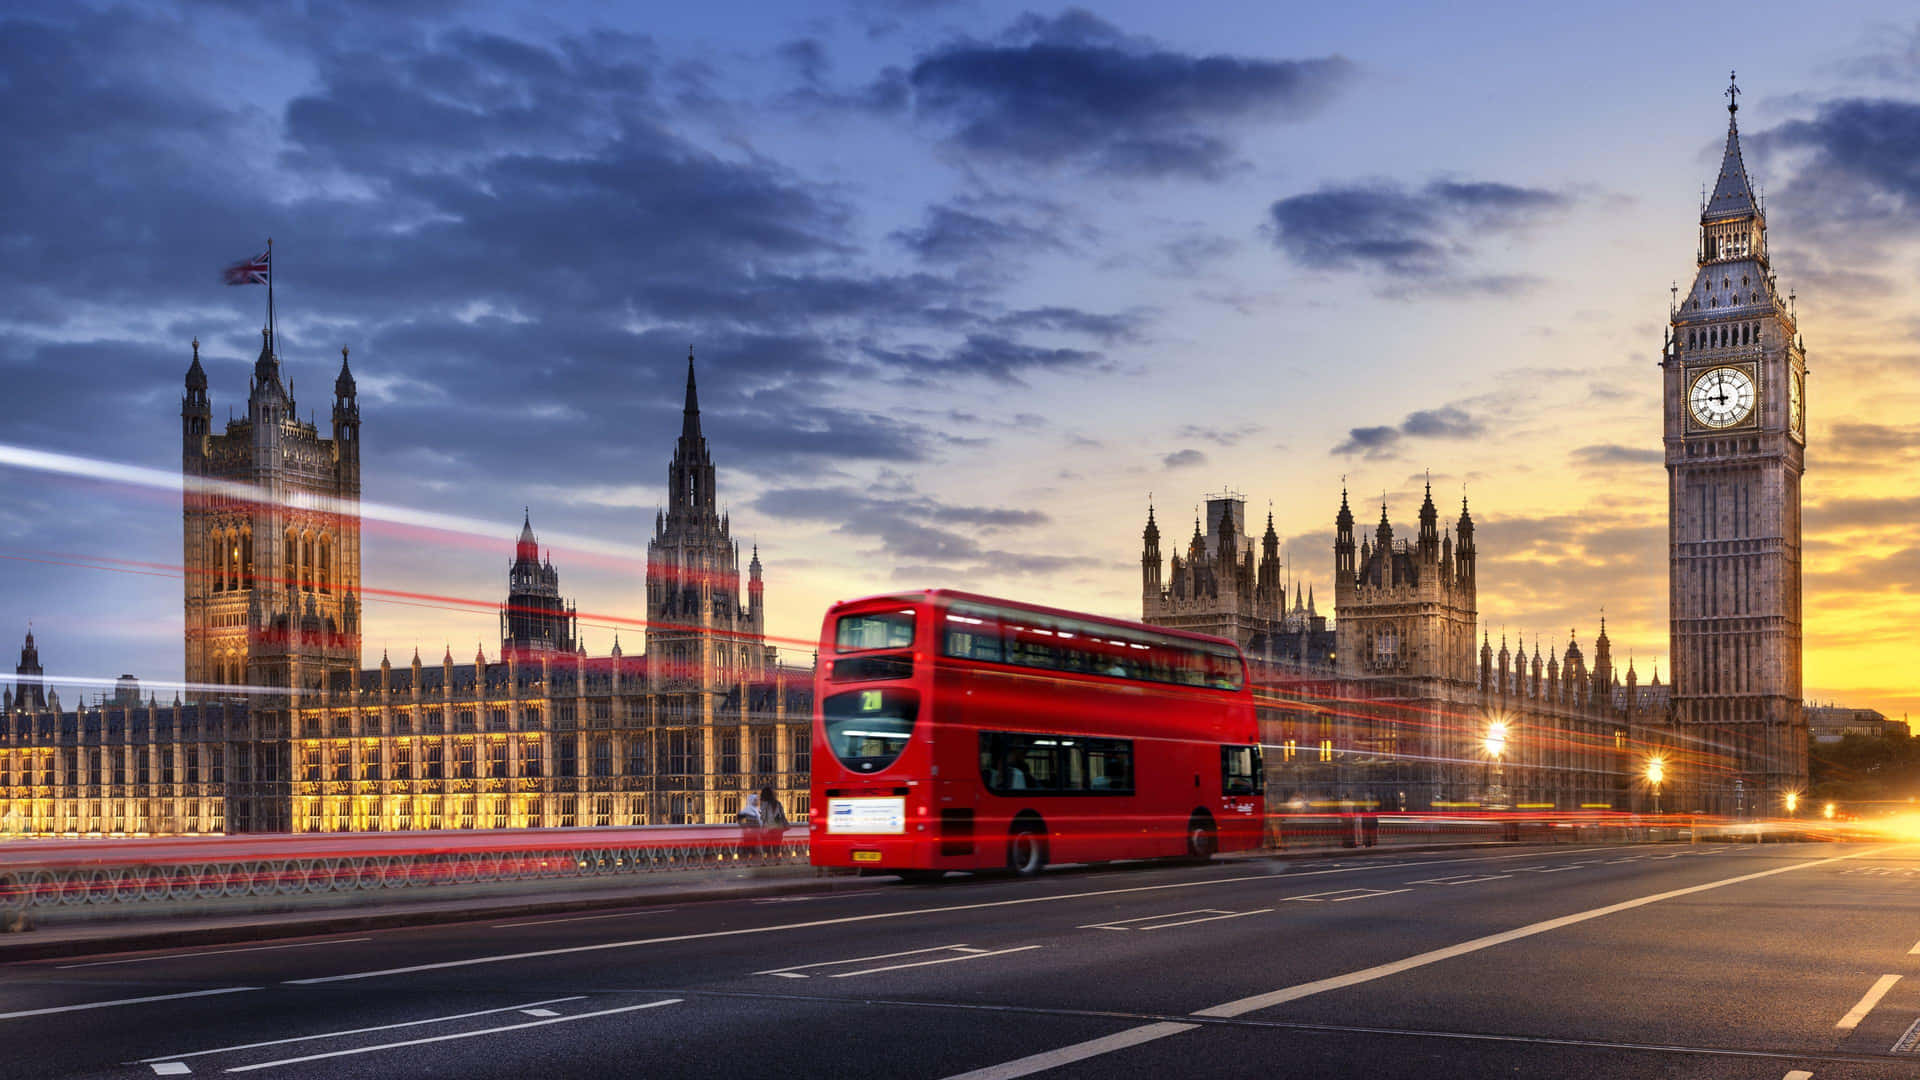 A Double Decker Bus Is Driving Past Big Ben And The Houses Of Parliament